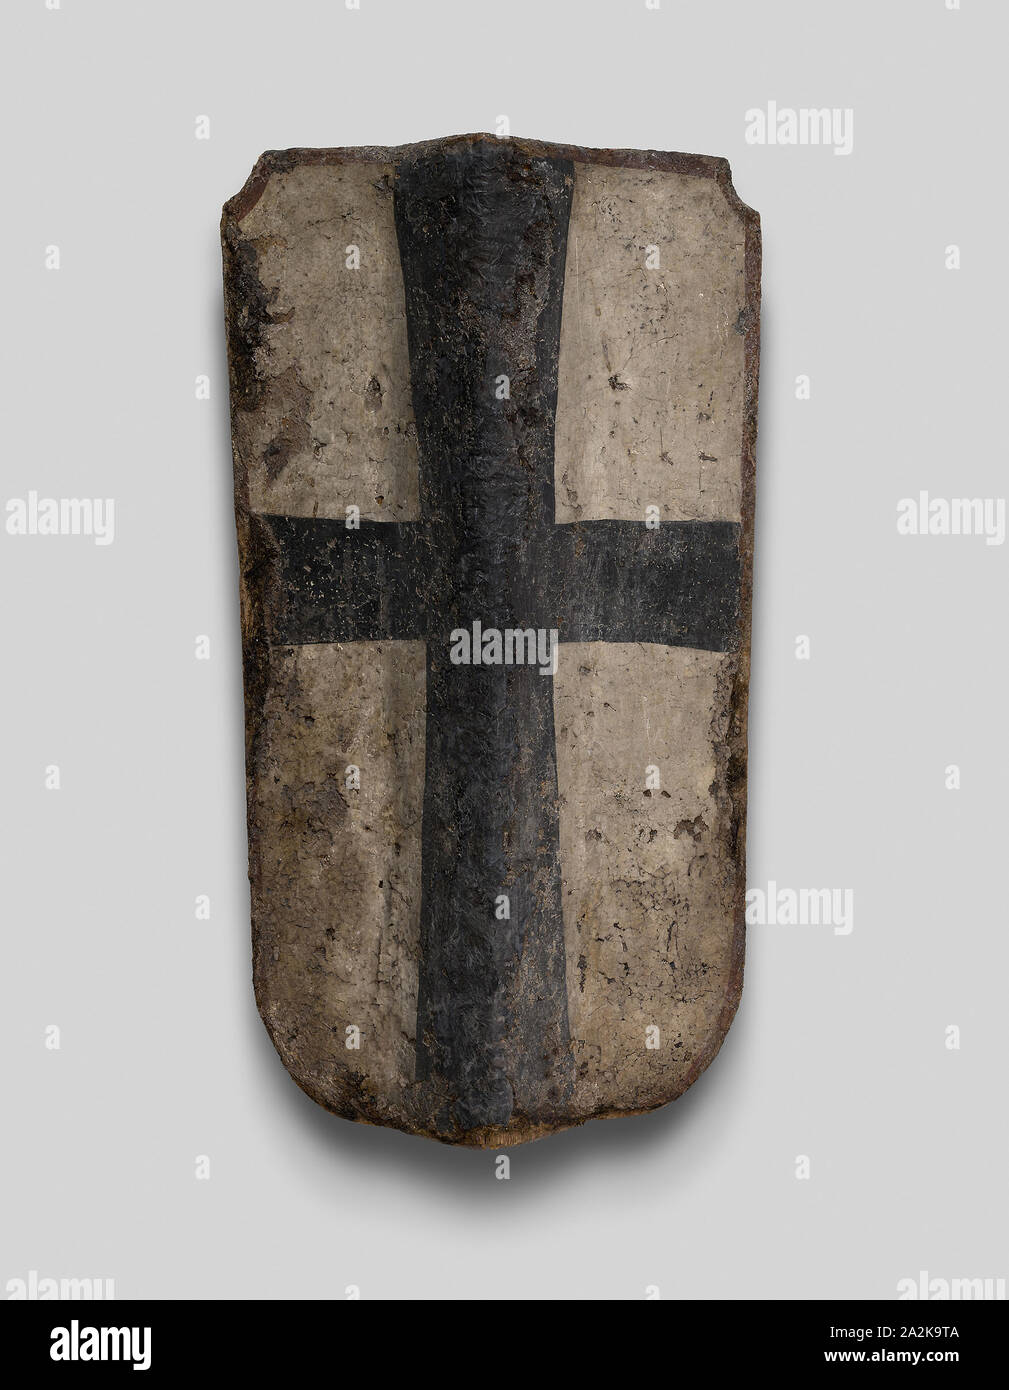 Hand Pavise with the Coat of Arms of the Teutonic Order, c. 1450, German, Germany, Fir, iron, hemp fiber, gesso, and pigment, 63.5 × 34.9 cm (25 × 18 3/4 in Stock Photo